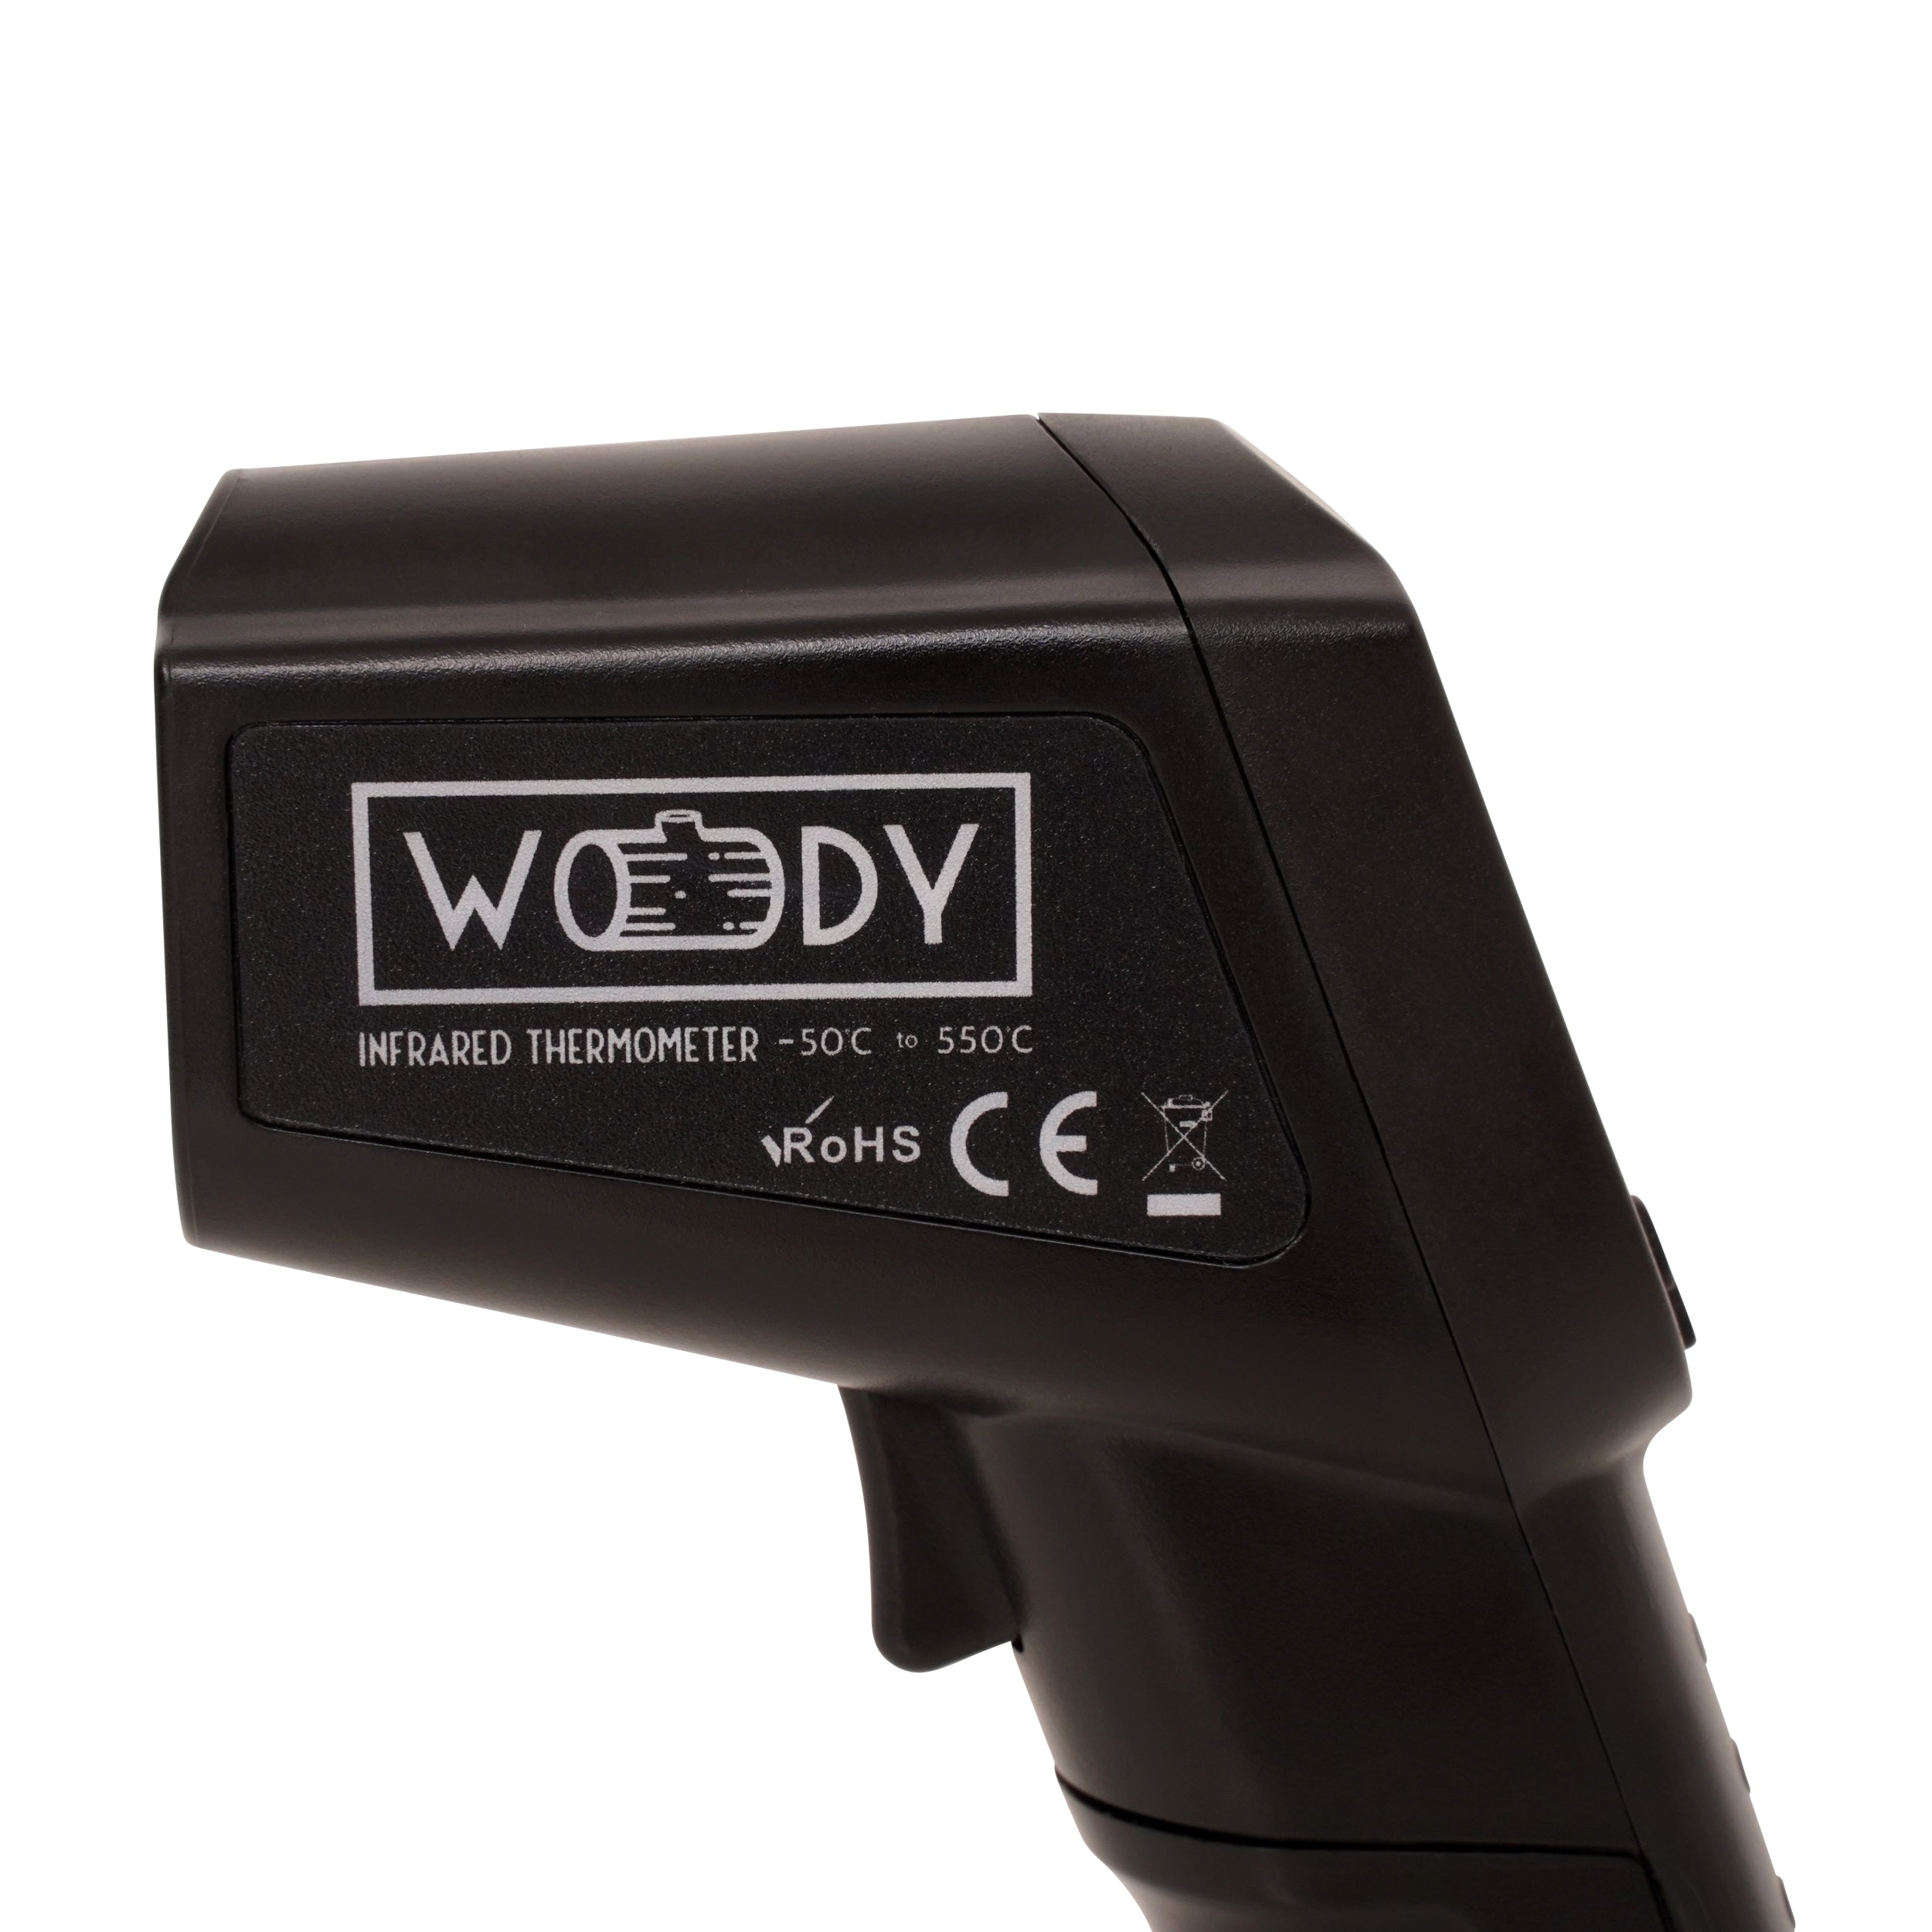 Woody Oven - Digital Thermometer